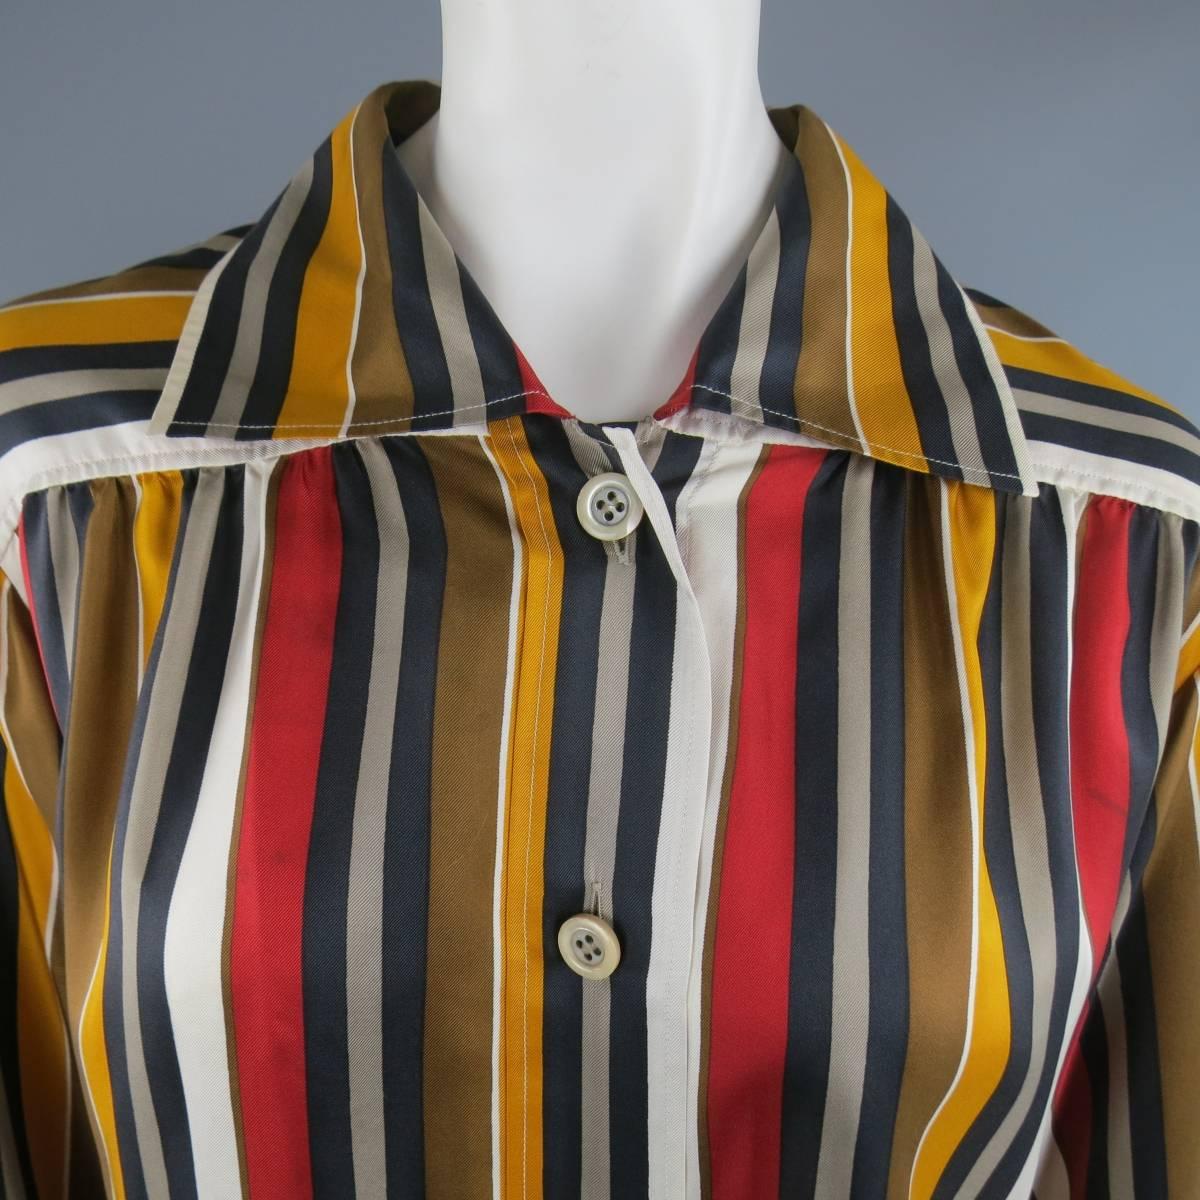 Vintage SAINT LAUENT Rive Gauche blouse comes in a gold, red, black, and white striped silk twill and features a spread collar, blousey sleeves, and gathered boxy silhouette. Wear and discolorations throughout fabric. As-Is. Made in France.
 
Fair